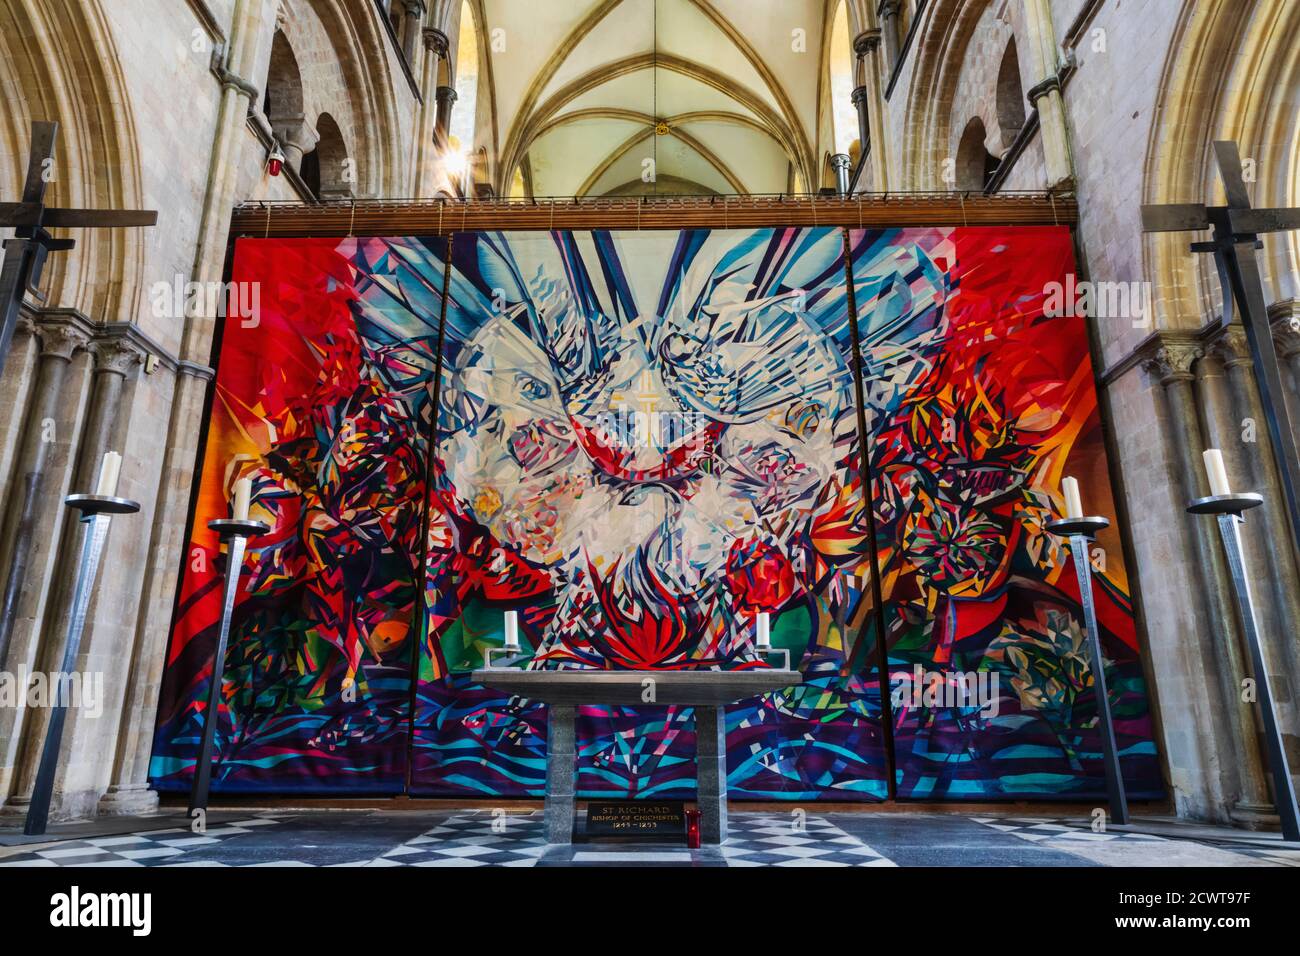 England, West Sussex, Chichester, Chichester Cathedral, The Shrine of St Richard, Tapestry by German Artist Ursula Benker-Schirmer depicting Images Re Stock Photo